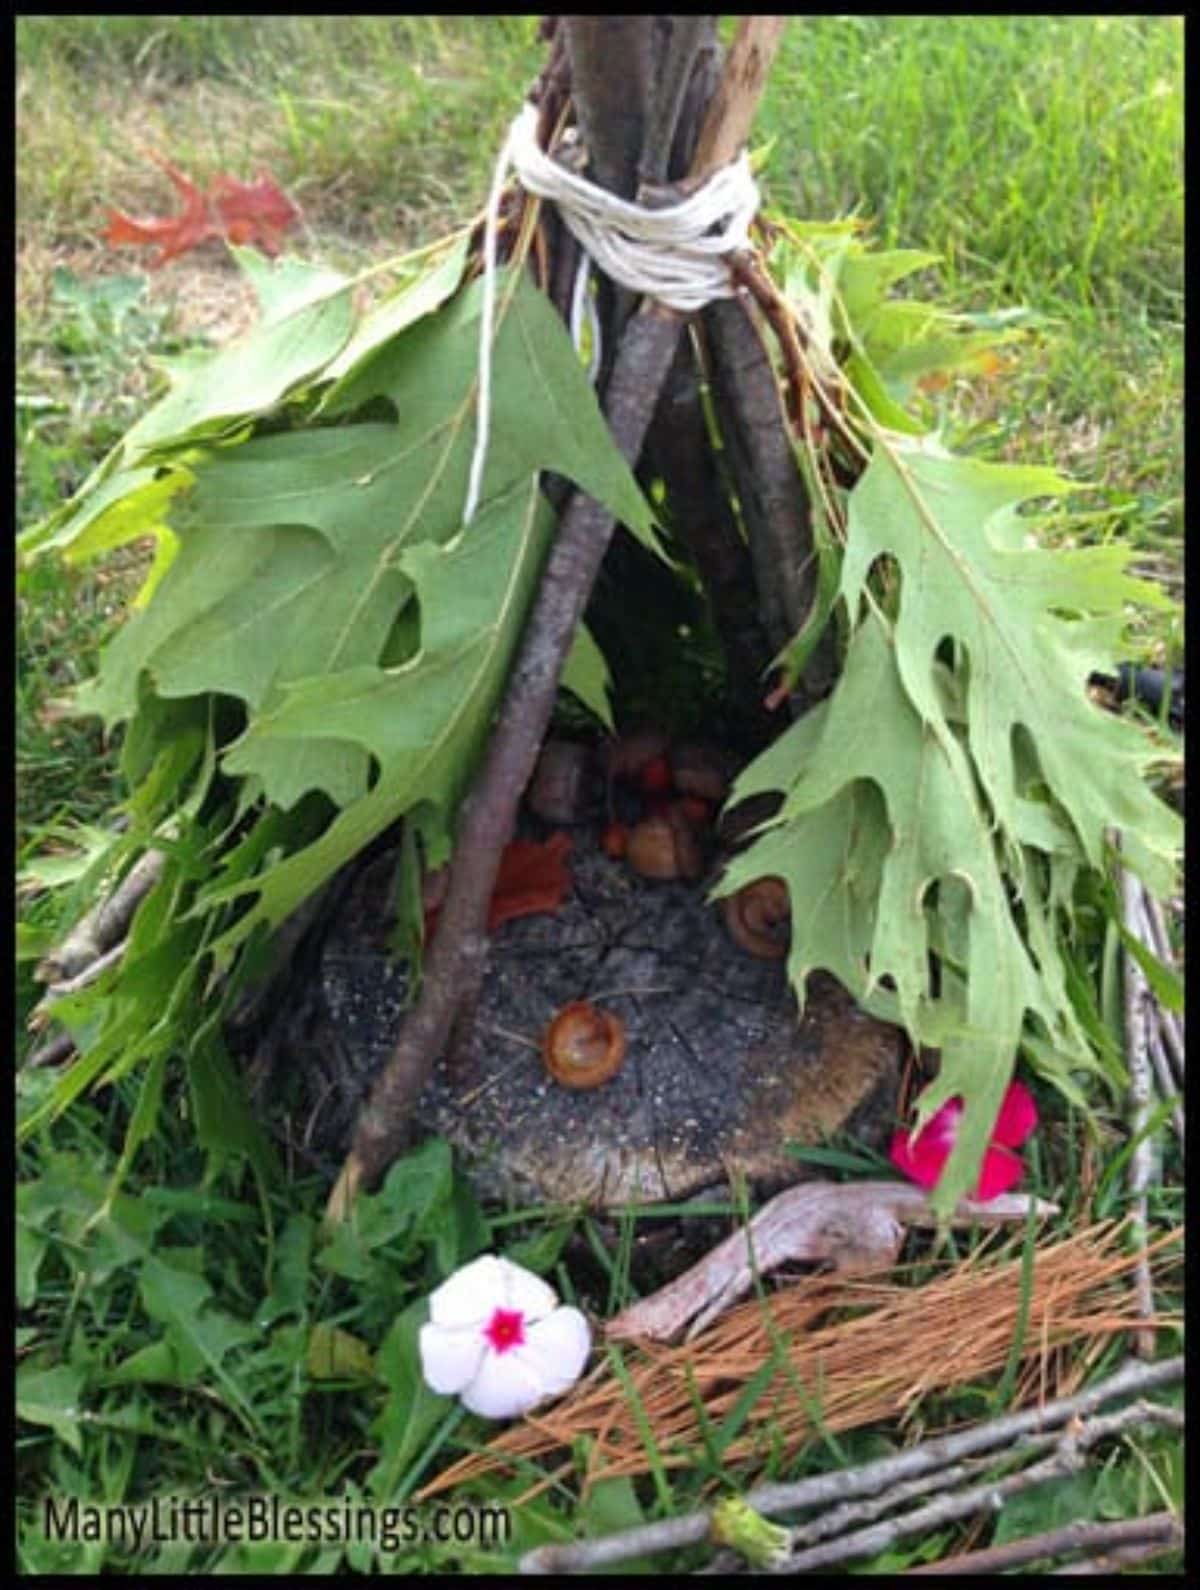 Teepe style fairy house made from natural items on a grass.